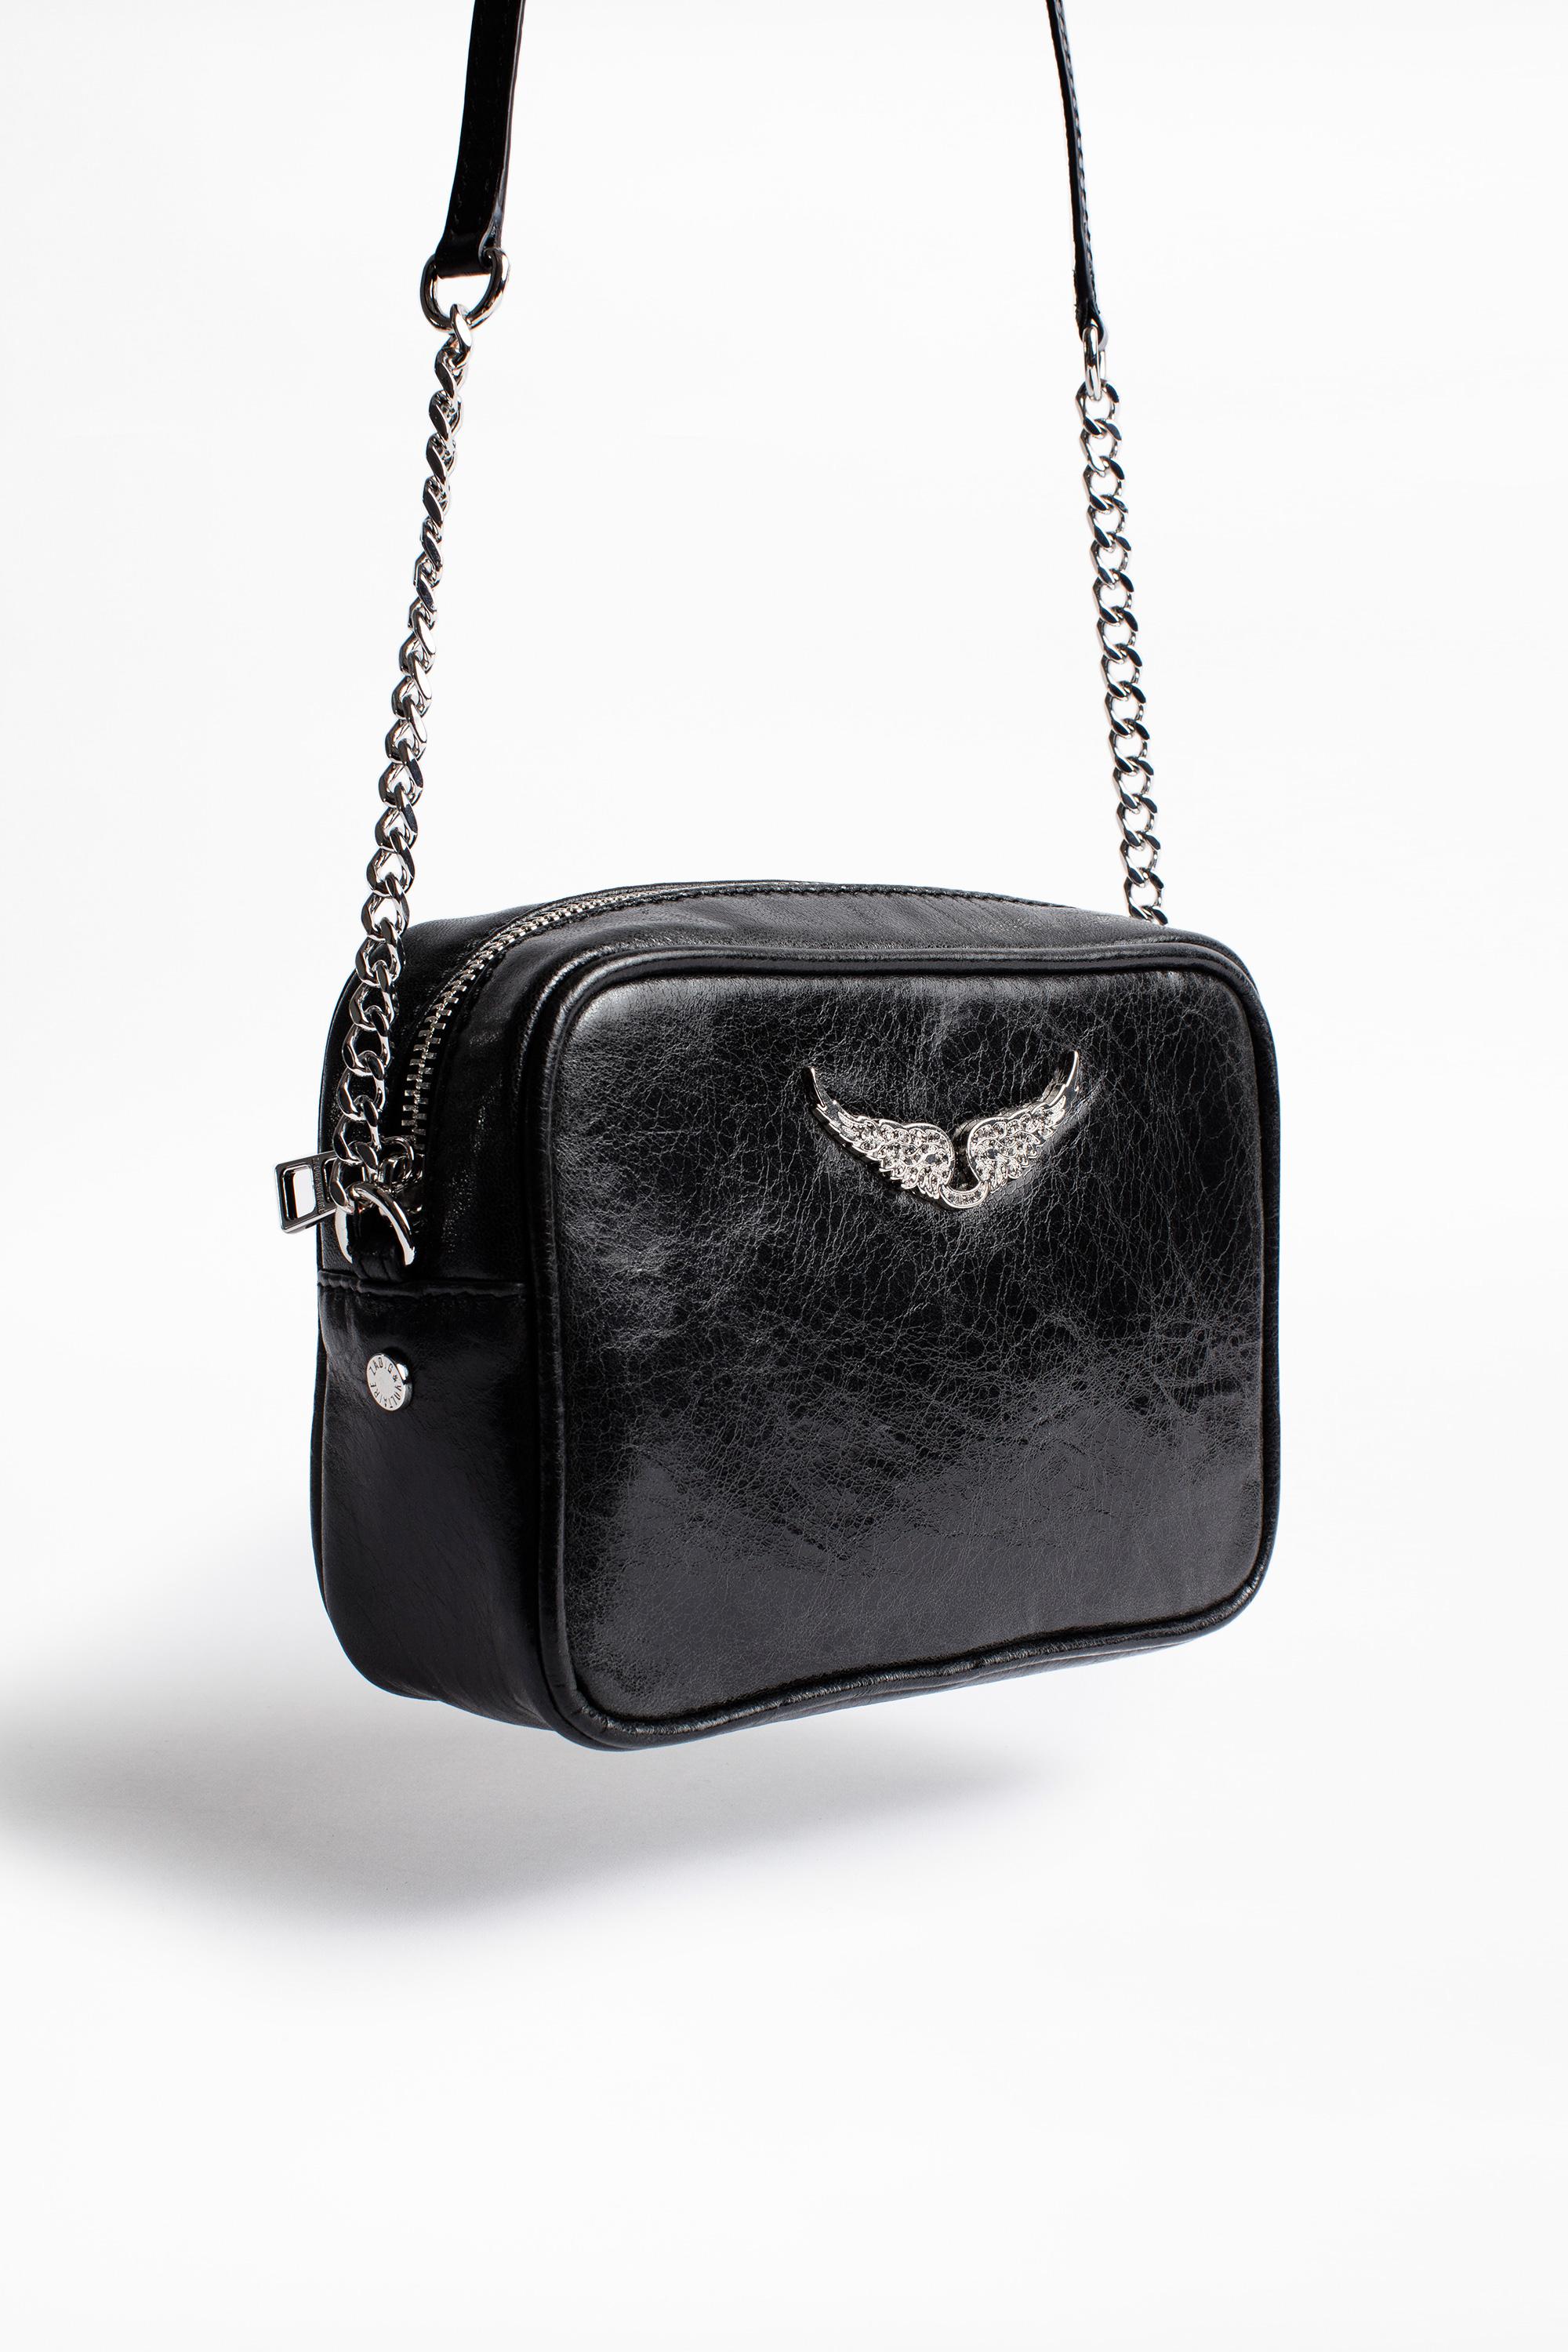 Zadig & Voltaire Leather Xs Boxy Crush Bag in Black - Lyst